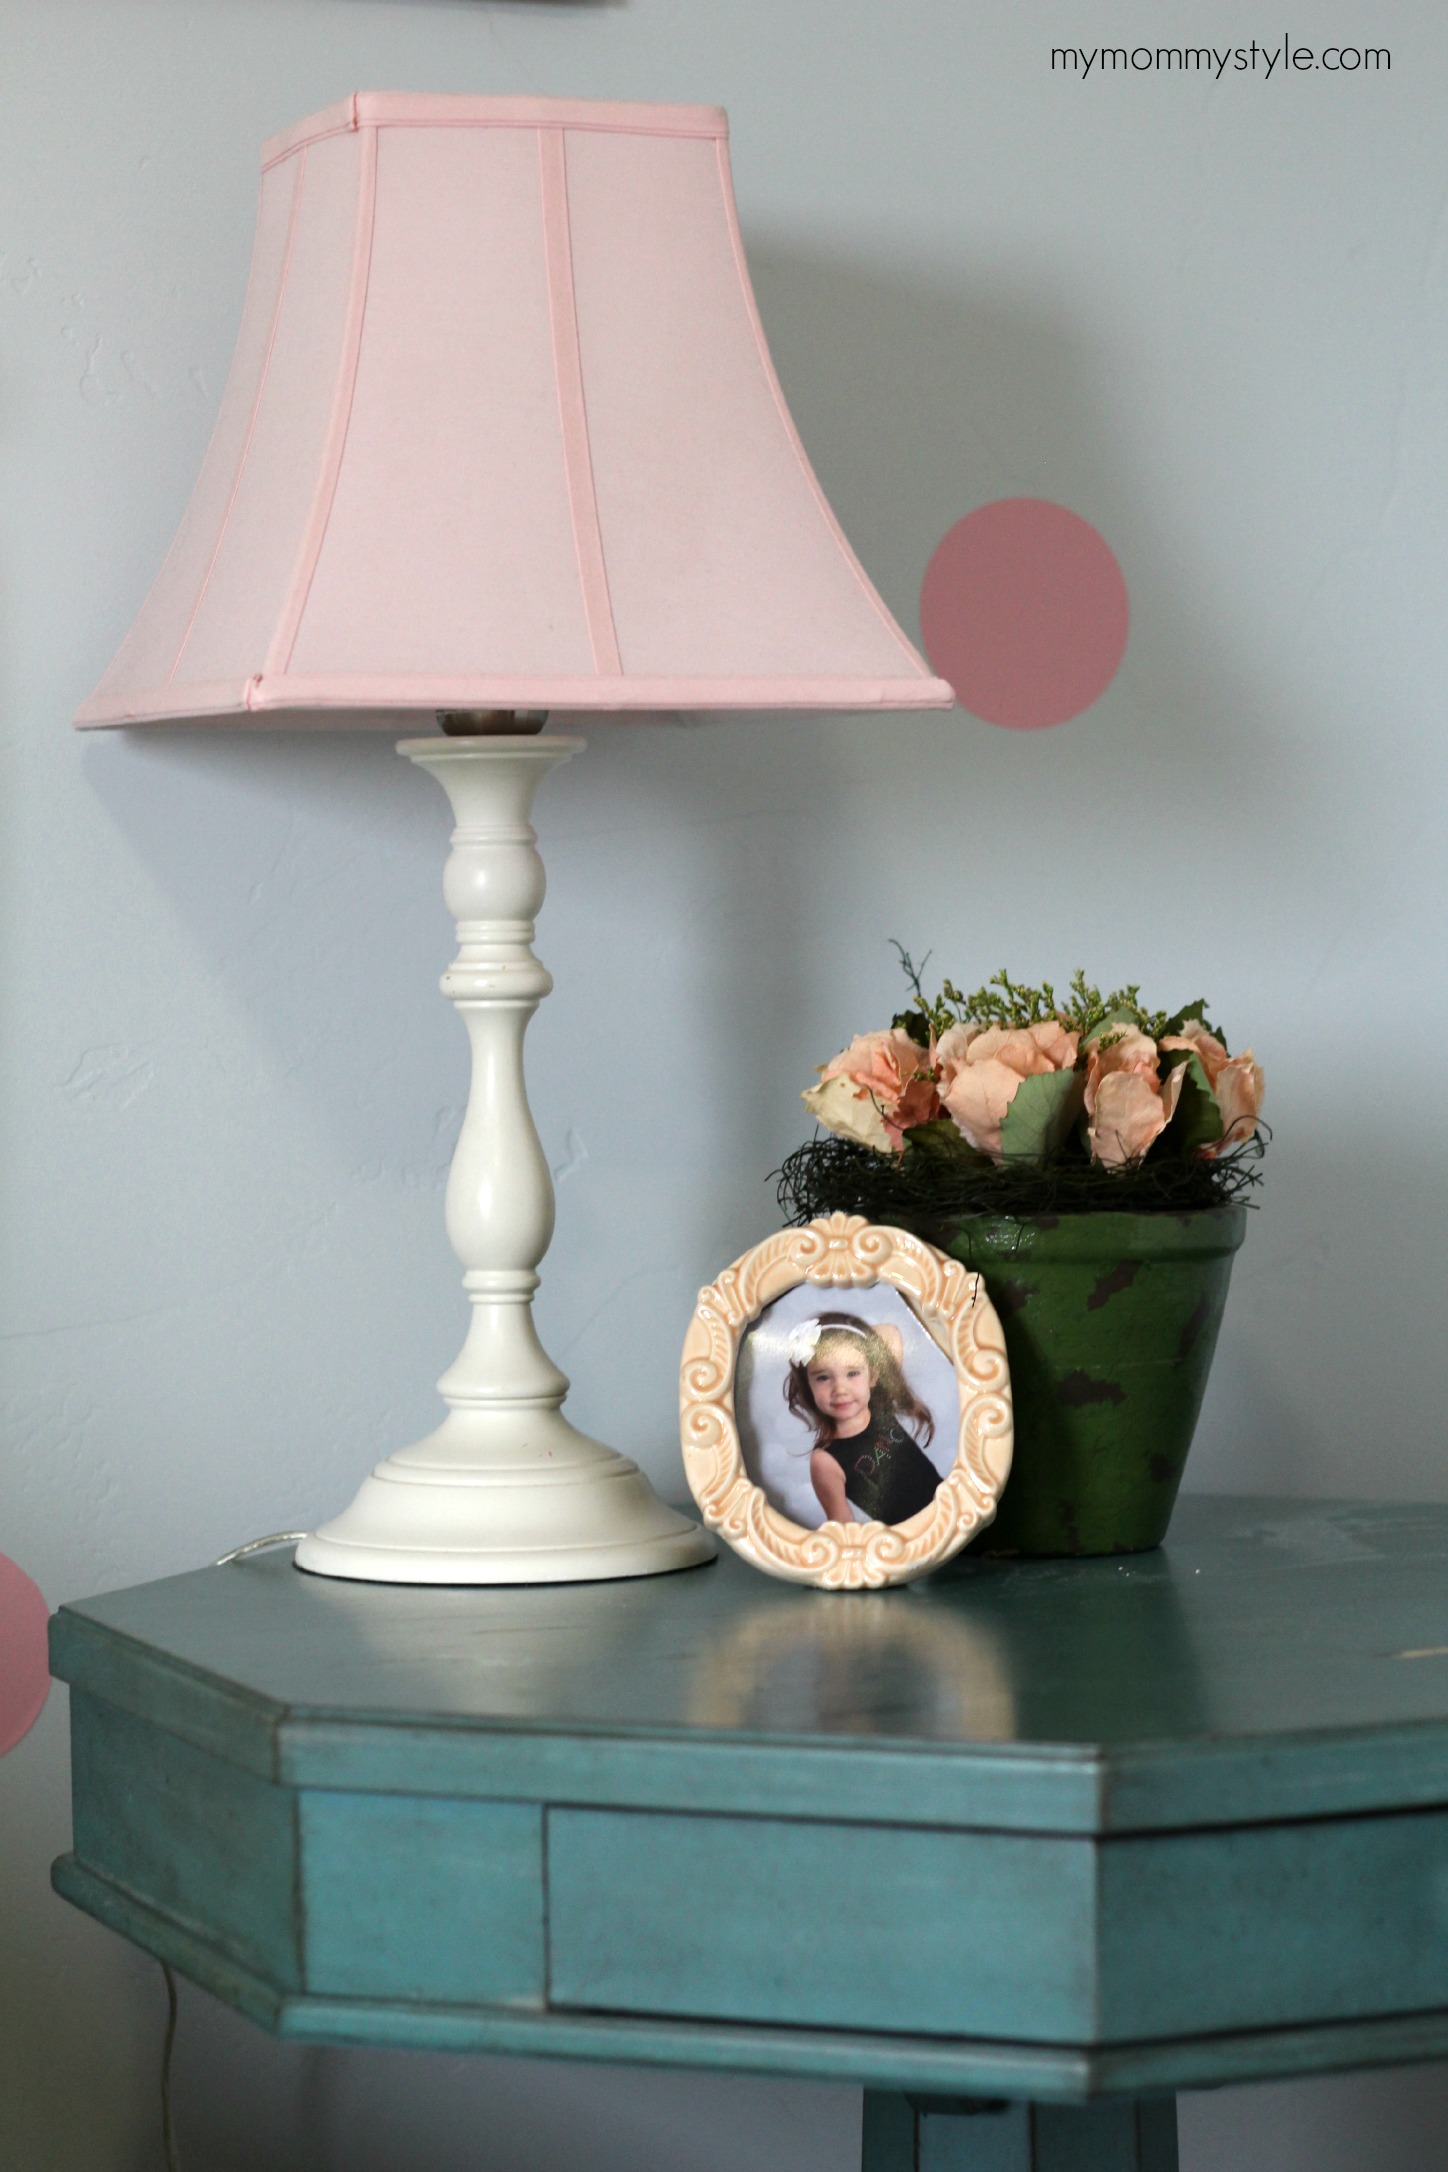 nightstand, little girls room, mymommystyle.com